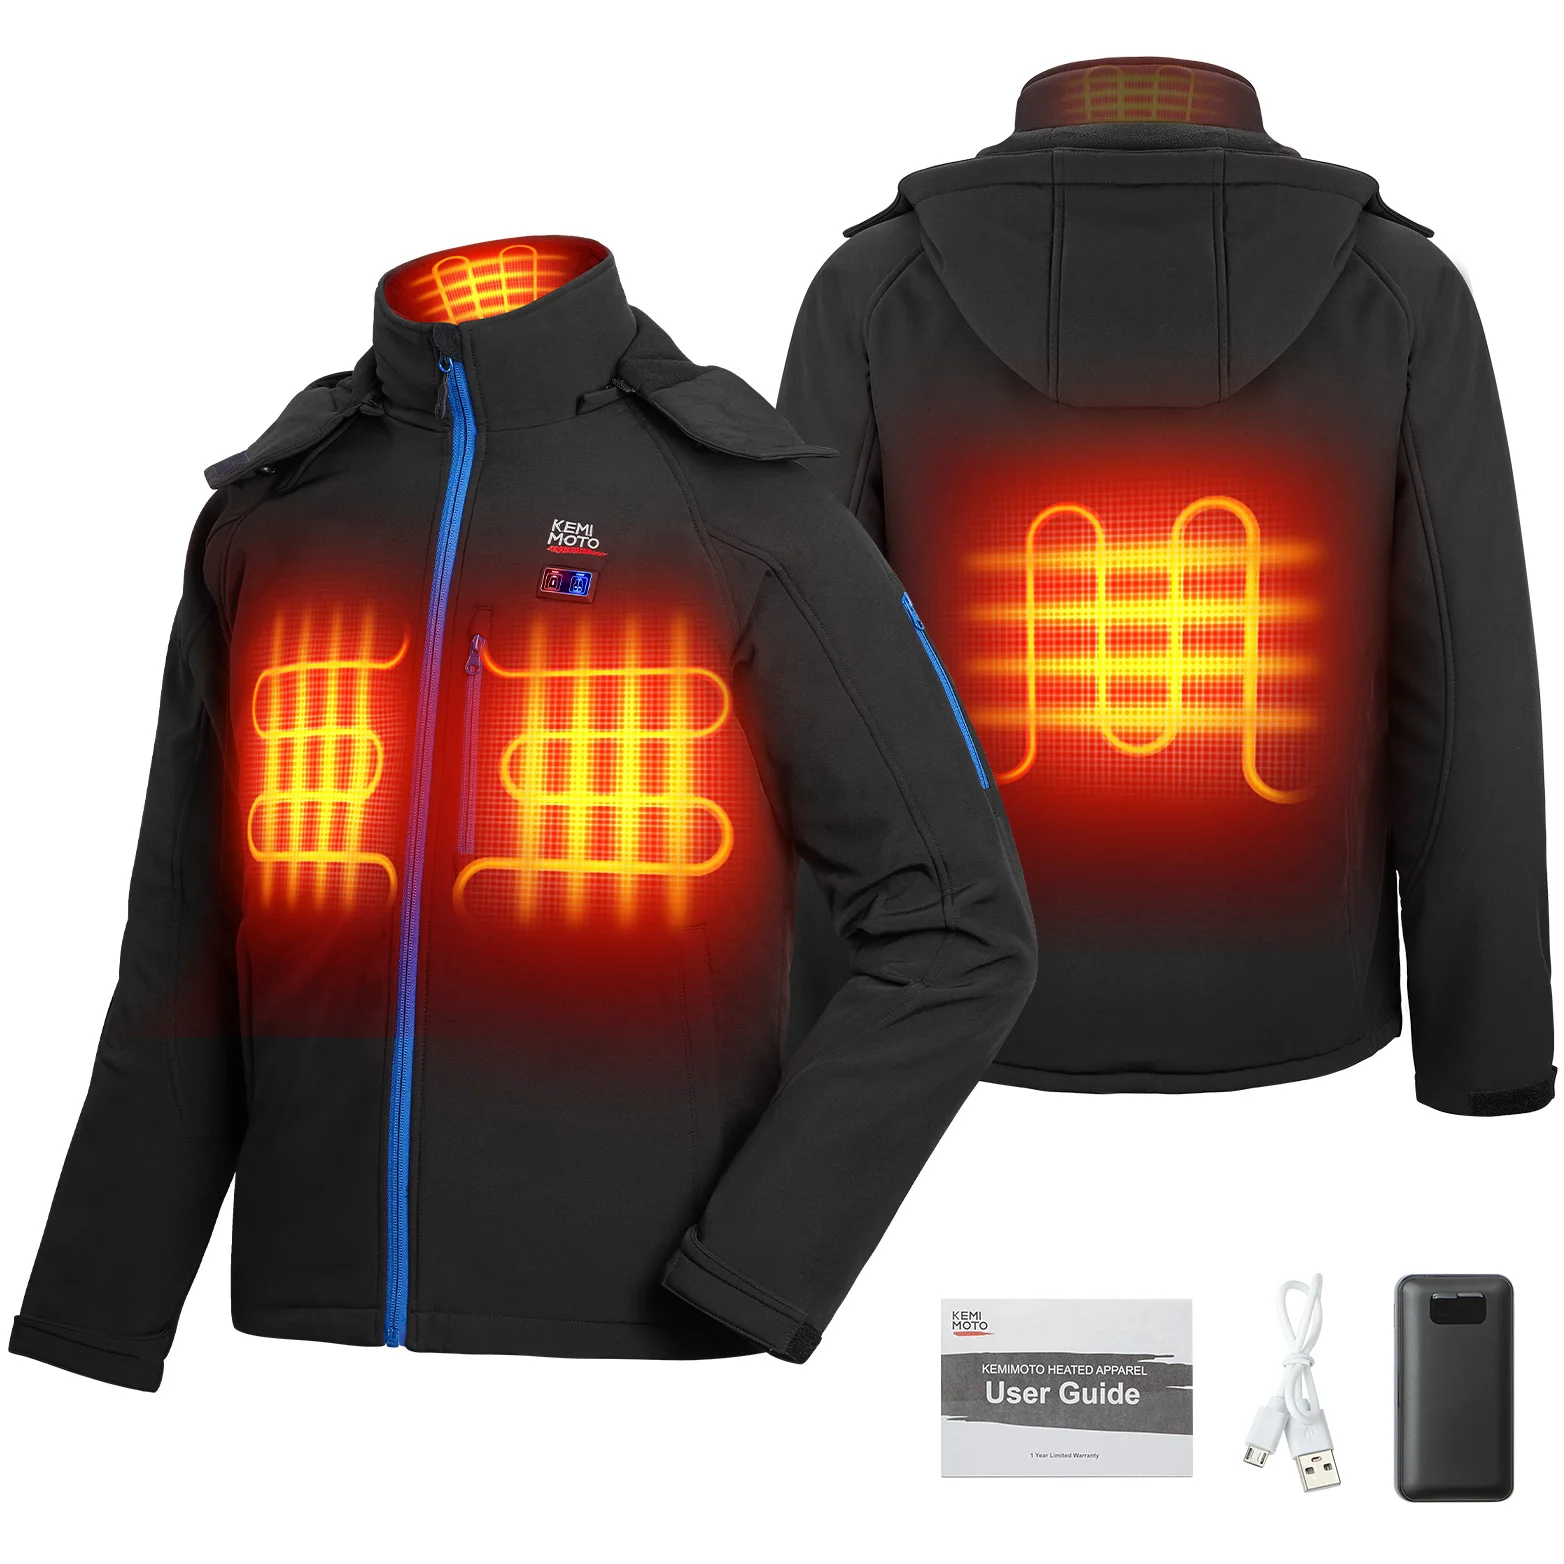 Motorcycle Electric Heating Jacket With USB Battery Warm Jacket Winter Thermal Clothes Windproof For Men Women Skiing Hiking